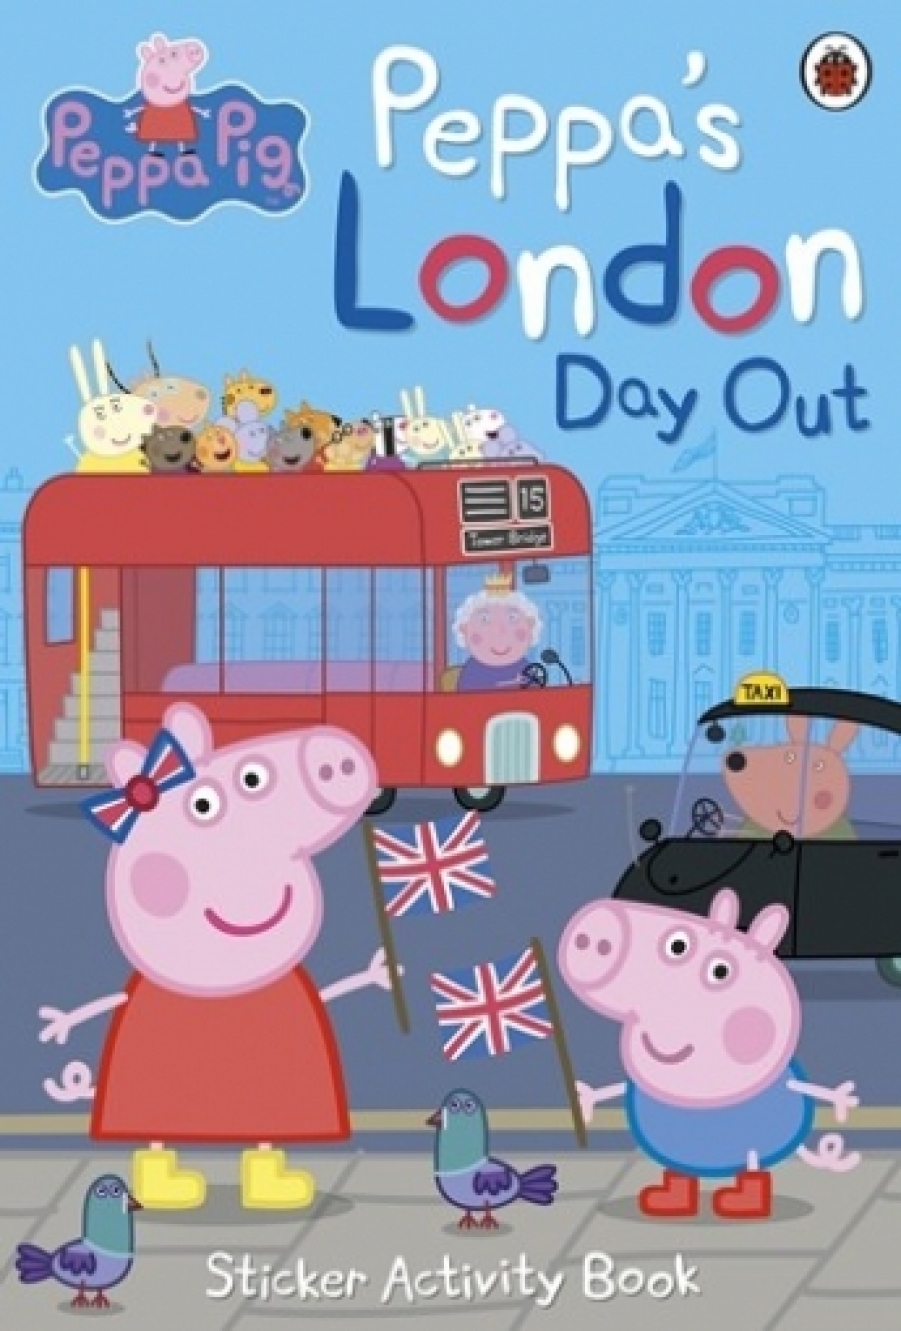 Peppa Pig: Peppas London Day Out (Sticker Activity Book) 